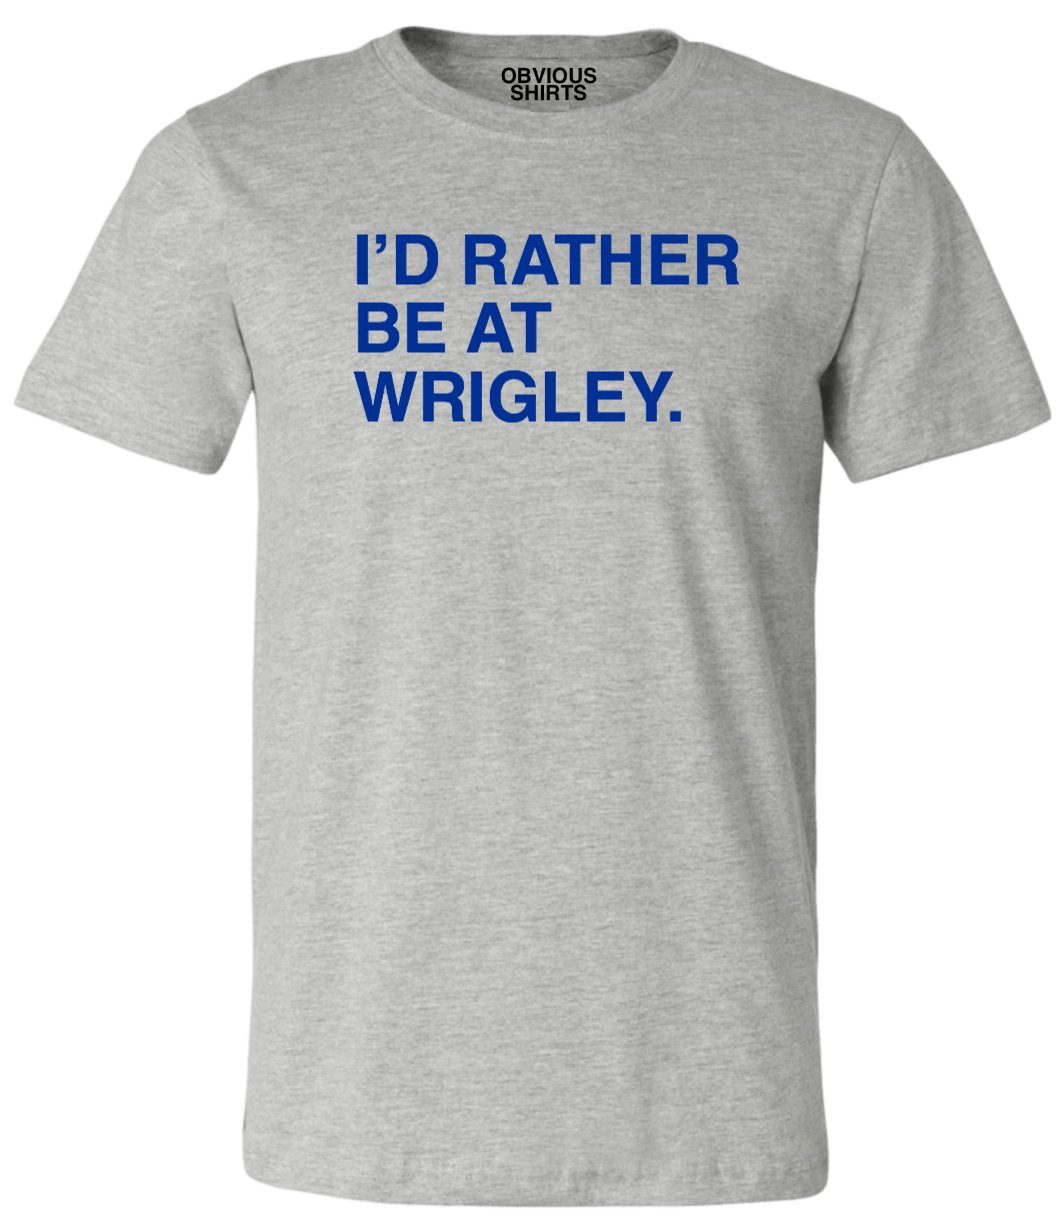 I'D RATHER BE AT WRIGLEY. (ROAD GREY) - OBVIOUS SHIRTS.